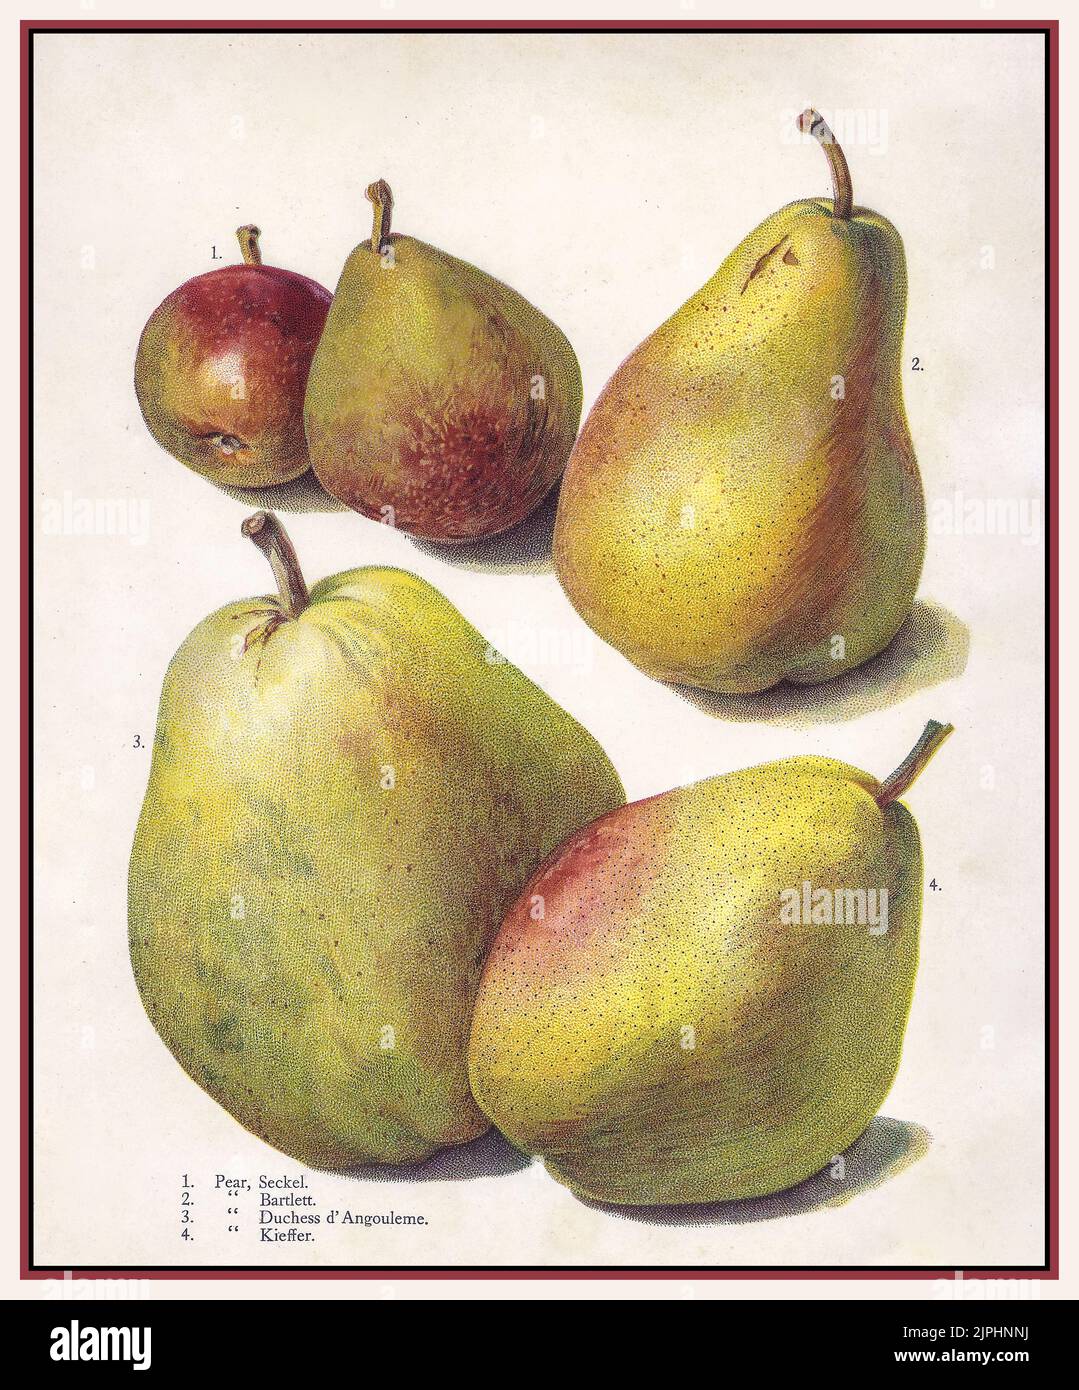 PEAR PEARS Vintage 1900s lithograph of Pears varieties No 1 Pear Seckel, No 2 Pear Bartlett, No 3 Pear Duchess d'Angouleme. No 4 Pear Kieffer, Fruit  detail illustration watercolour Stock Photo